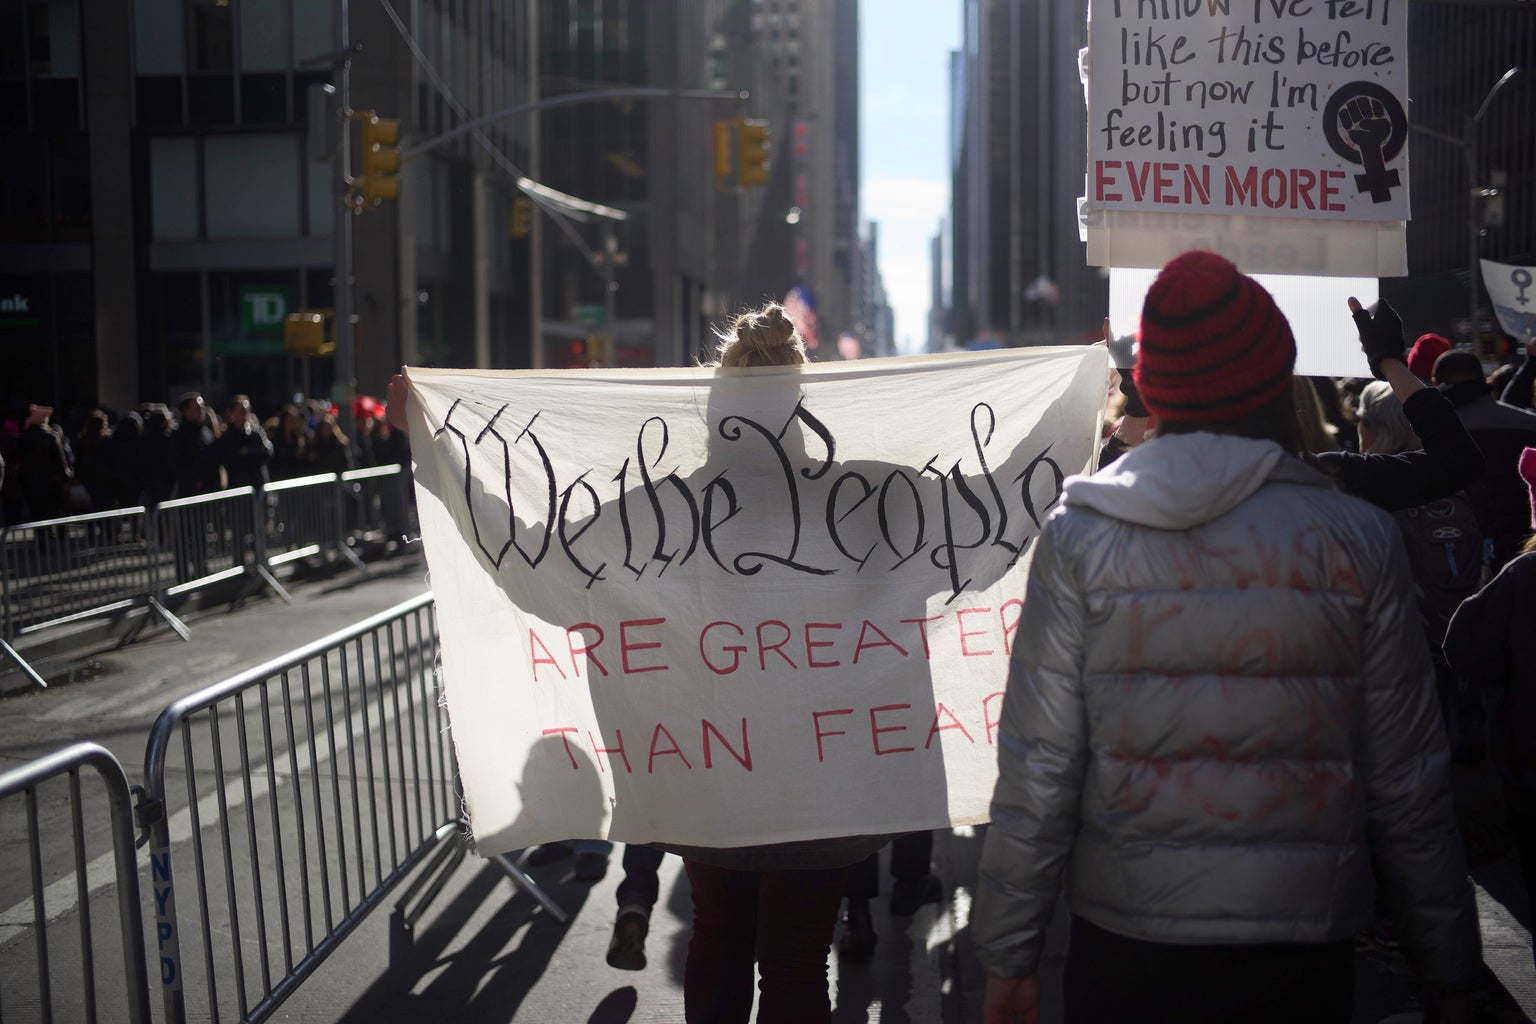 \"we the people are greater than fear\" sign from the women\'s march in NYC